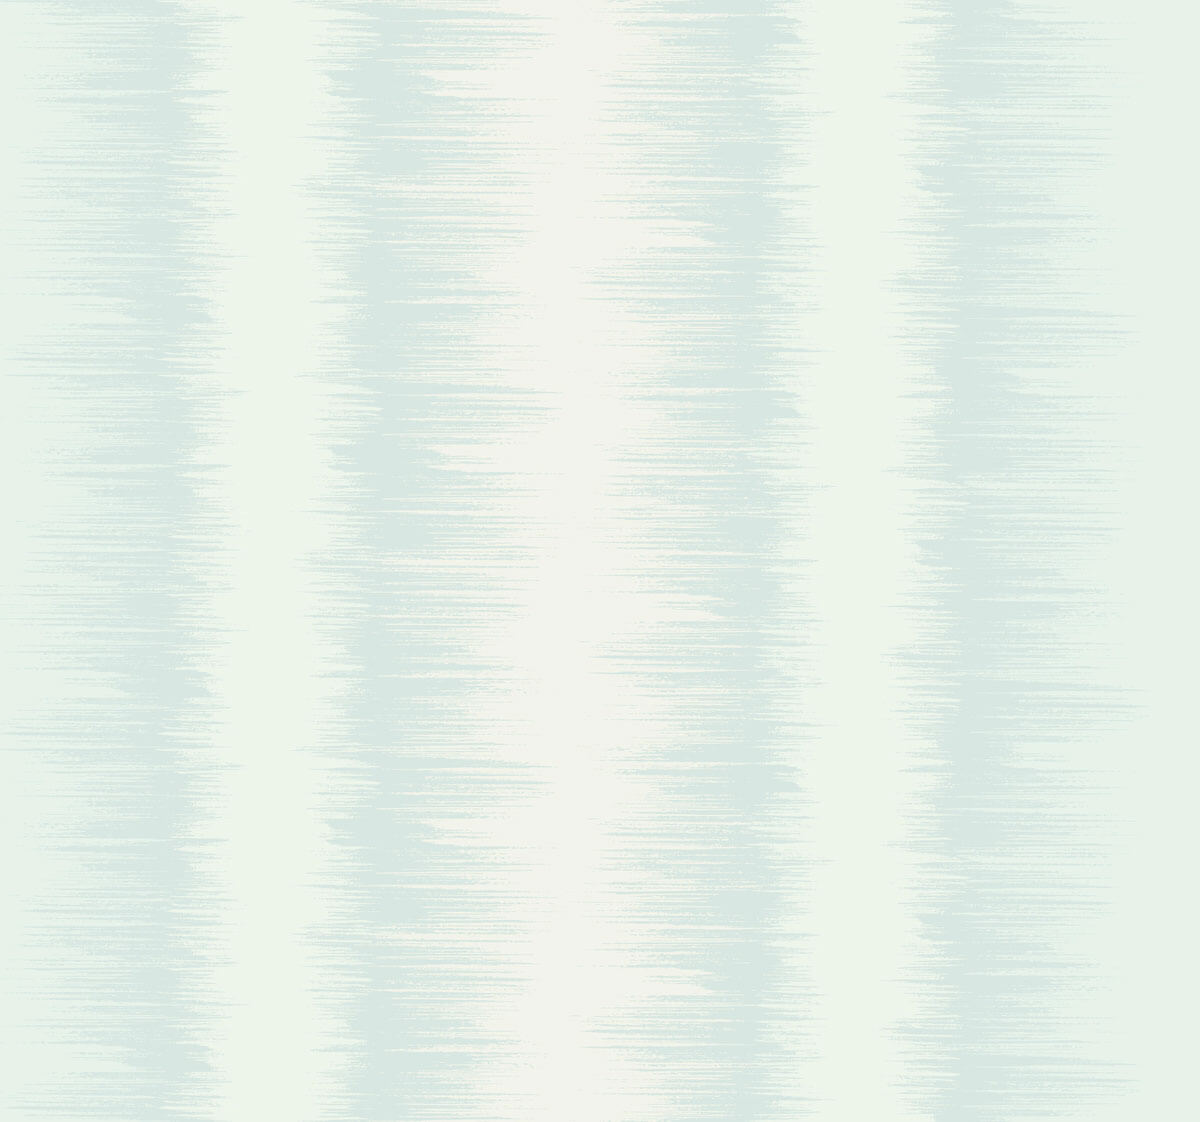 Quill Stripe Wallpaper by Candice Olson - SAMPLE ONLY